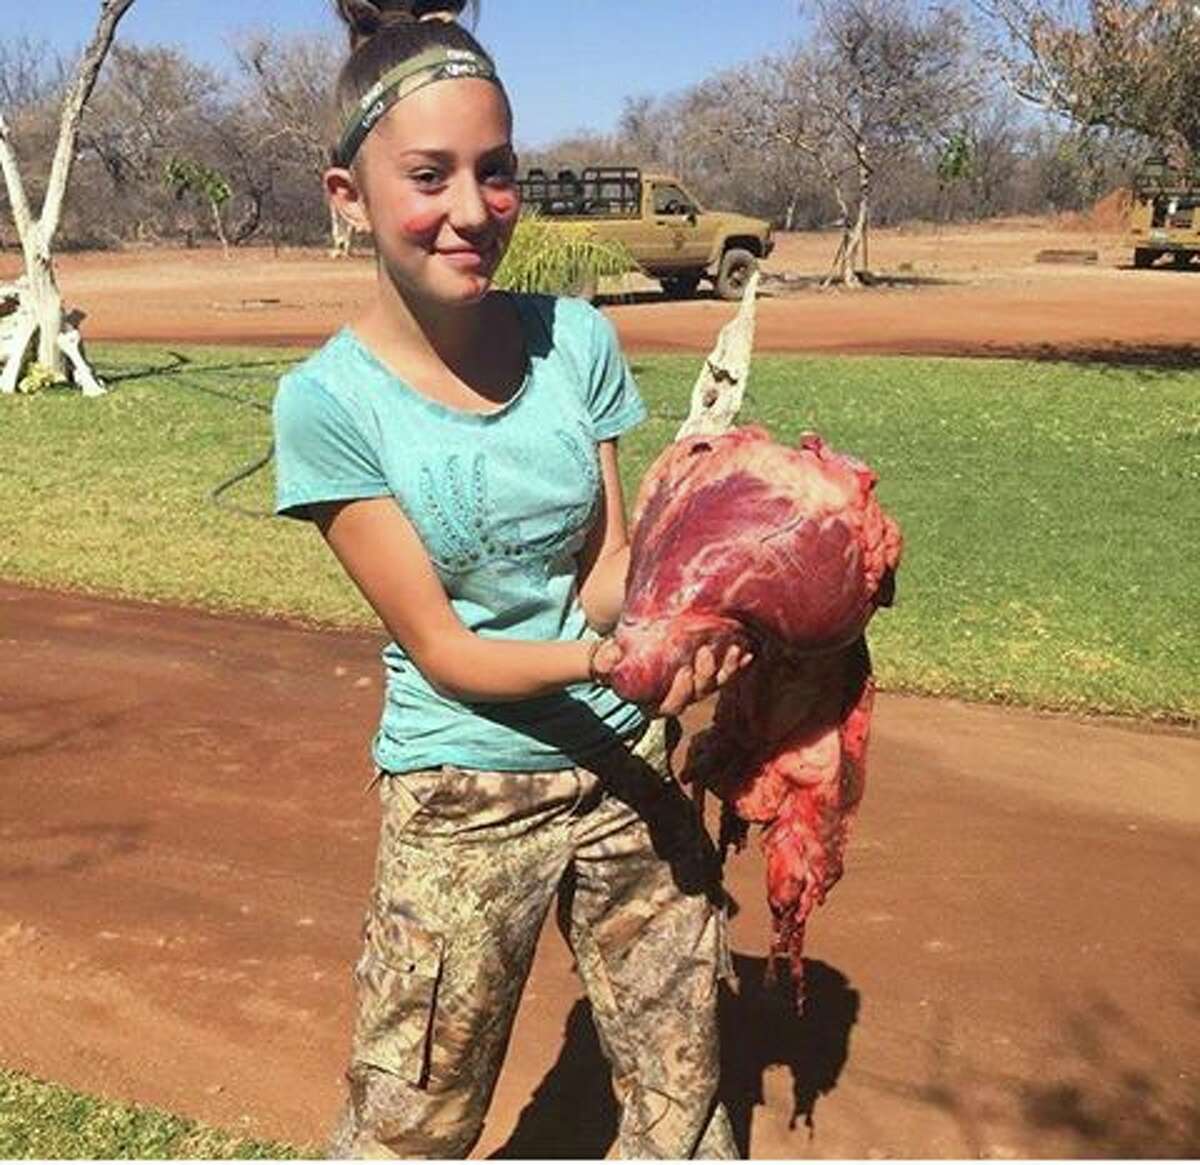 Aryanna Gourdin, 12, pictured alongside some of her recent hunts, which are causing controversy online.